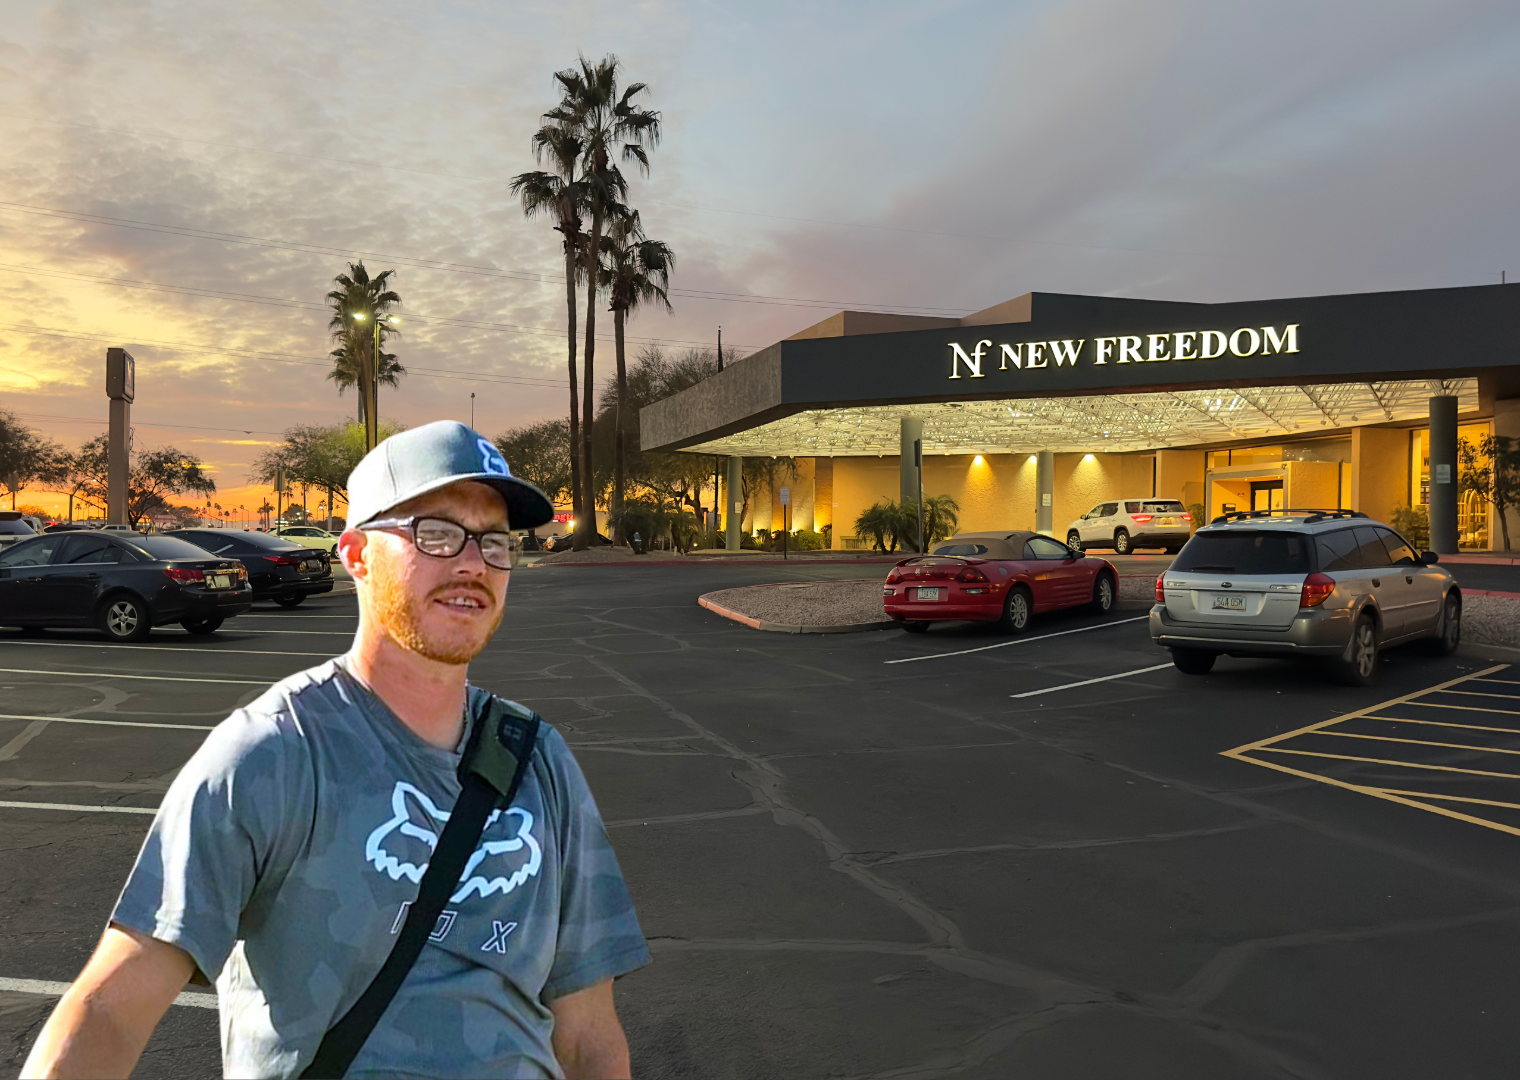 "A man standing before the New Freedom facility, representing a personal story of recovery and redemption."